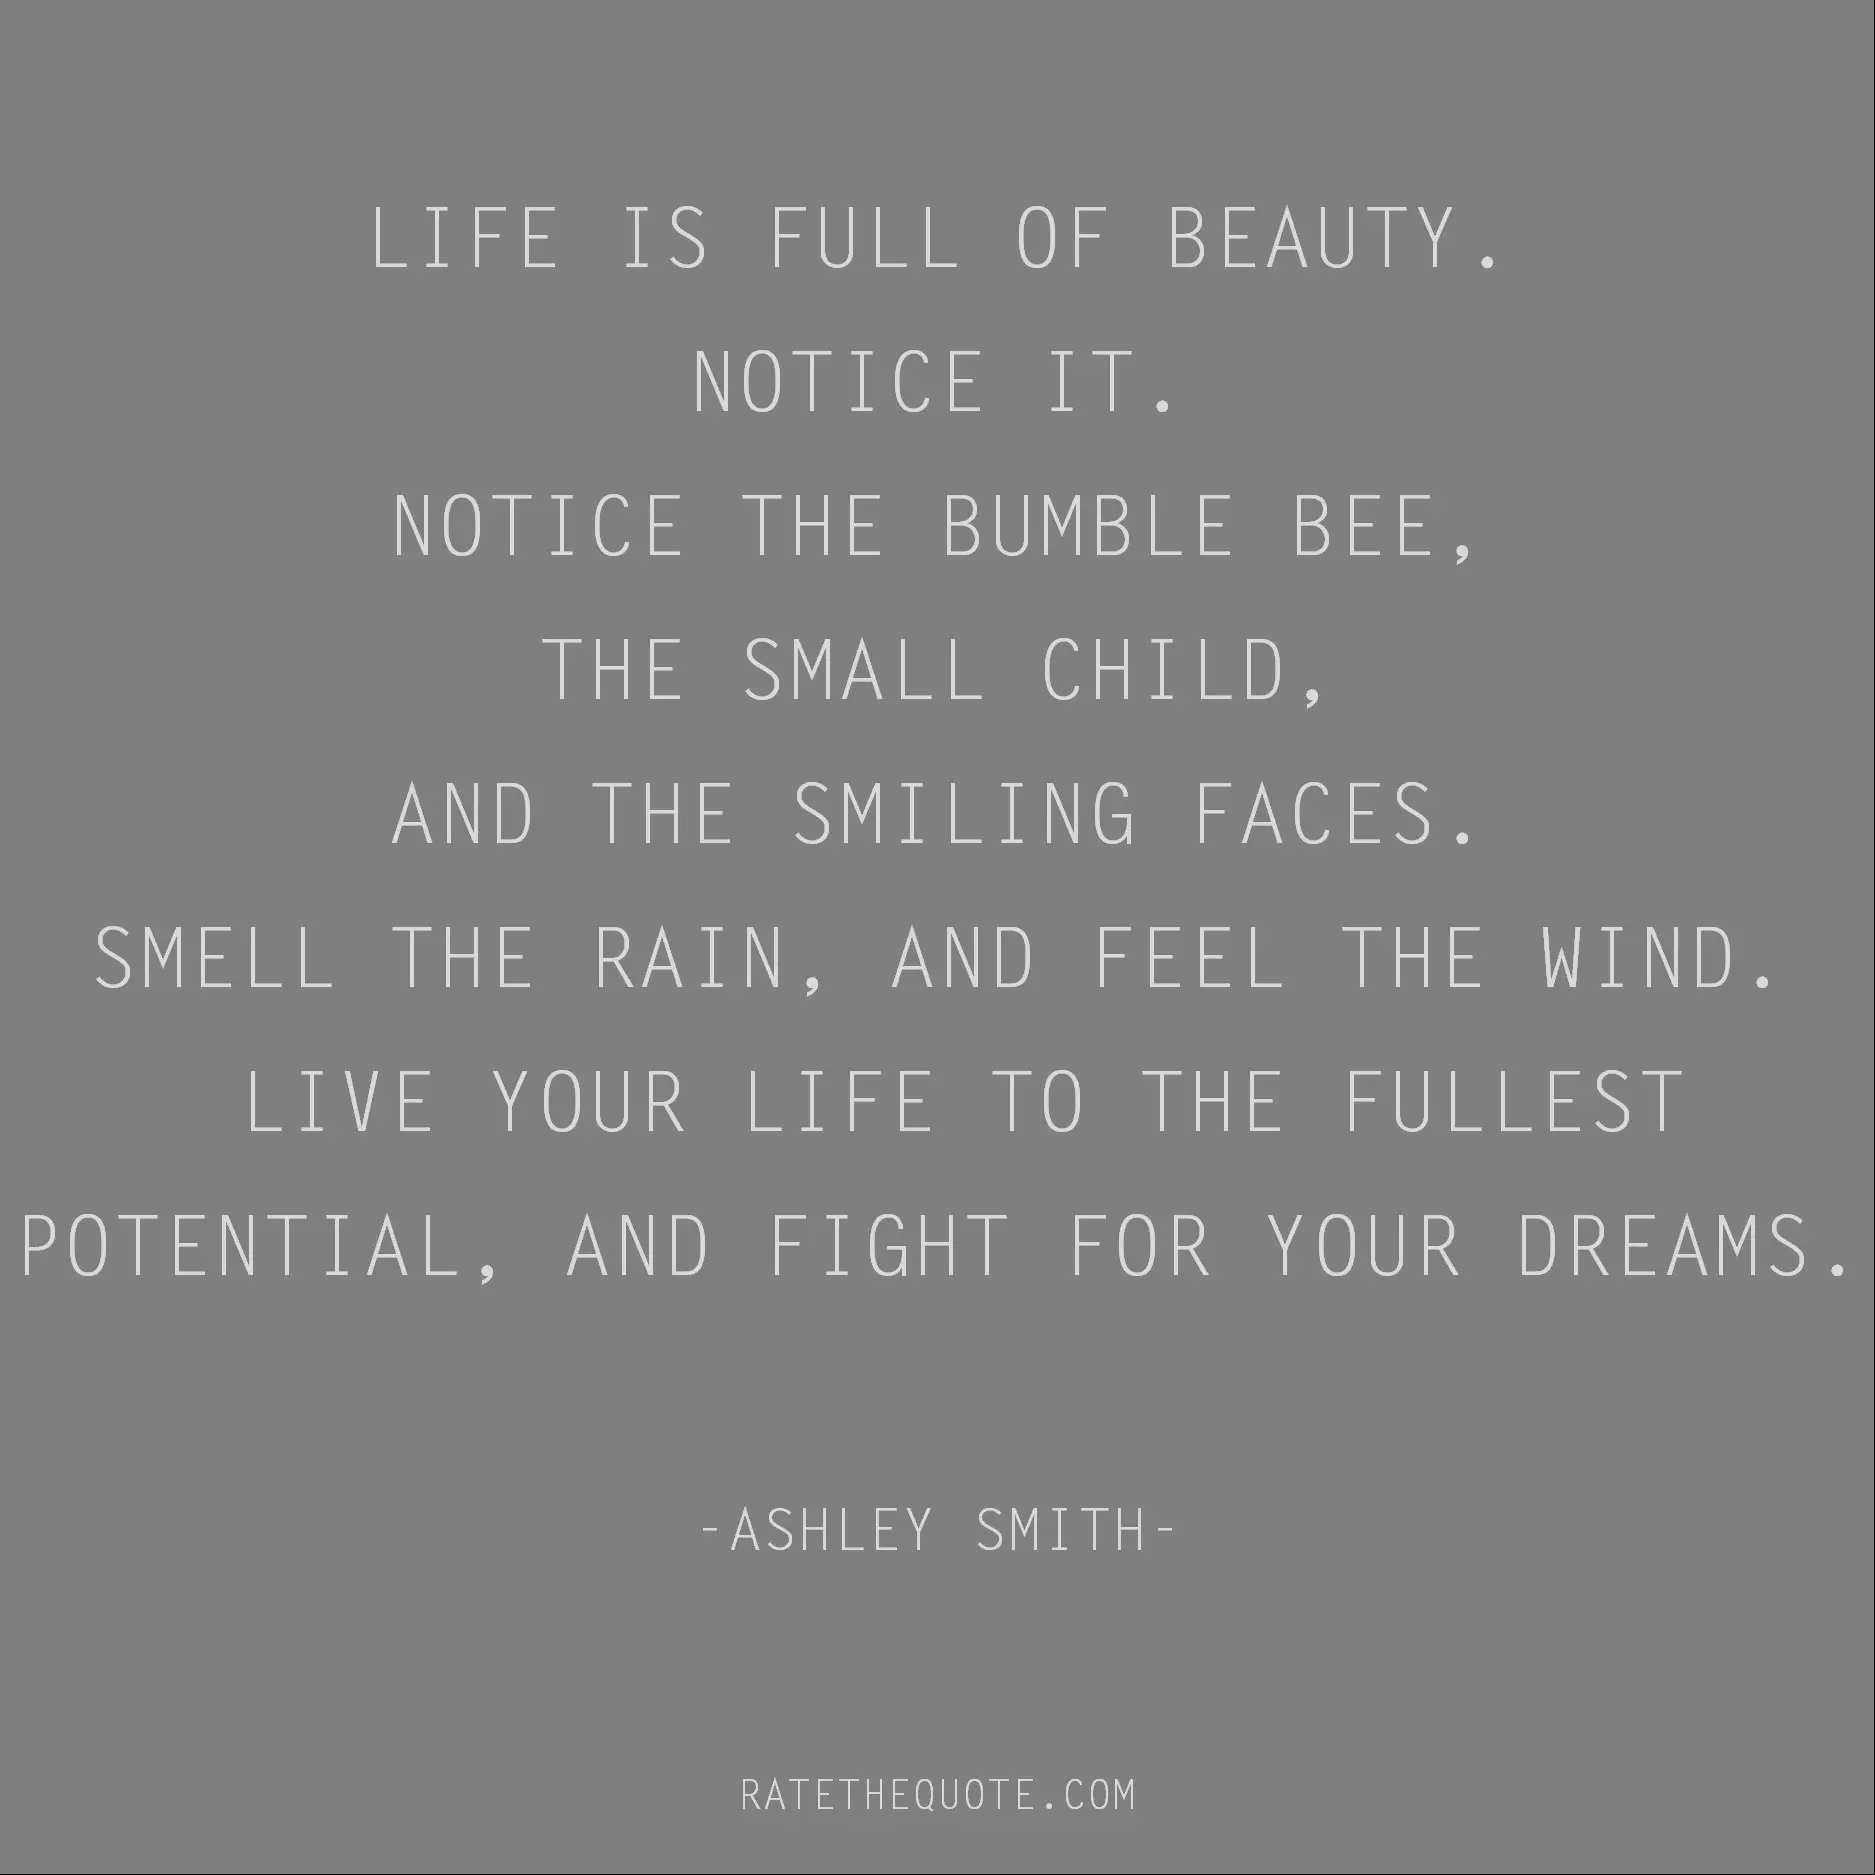 Beauty Quotes Life is full of beauty. Notice it. Notice the bumble bee, the small child, and the smiling faces. Smell the rain, and feel the wind. Live your life to the fullest potential, and fight for your dreams. Ashley Smith